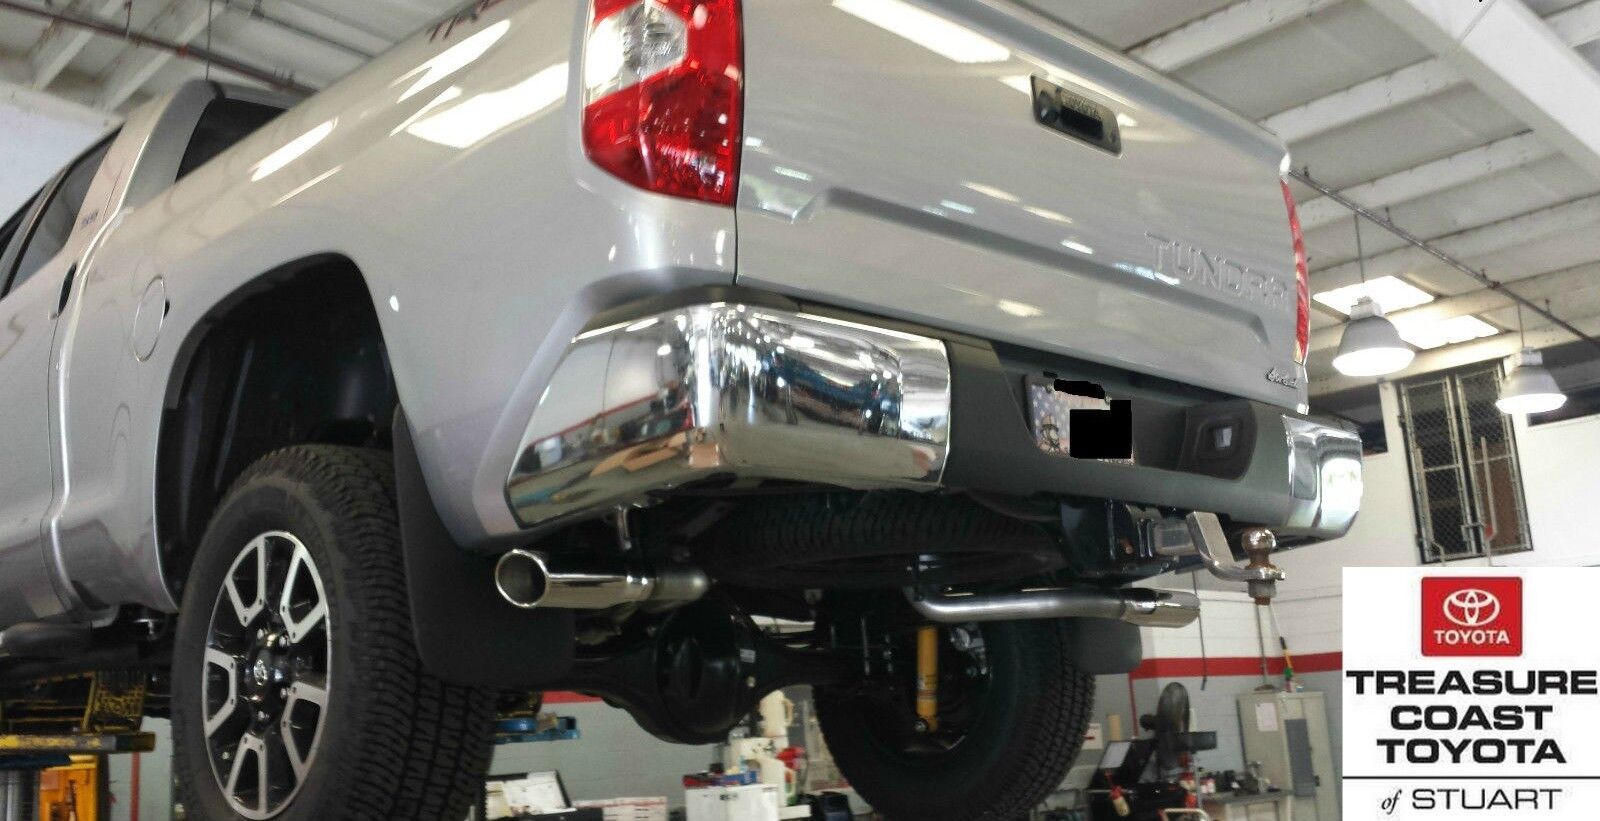 NEW OEM TOYOTA TUNDRA TRD PERFOMANCE DUAL EXHAUST SYSTEM & TRD TAILPIPE KIT  